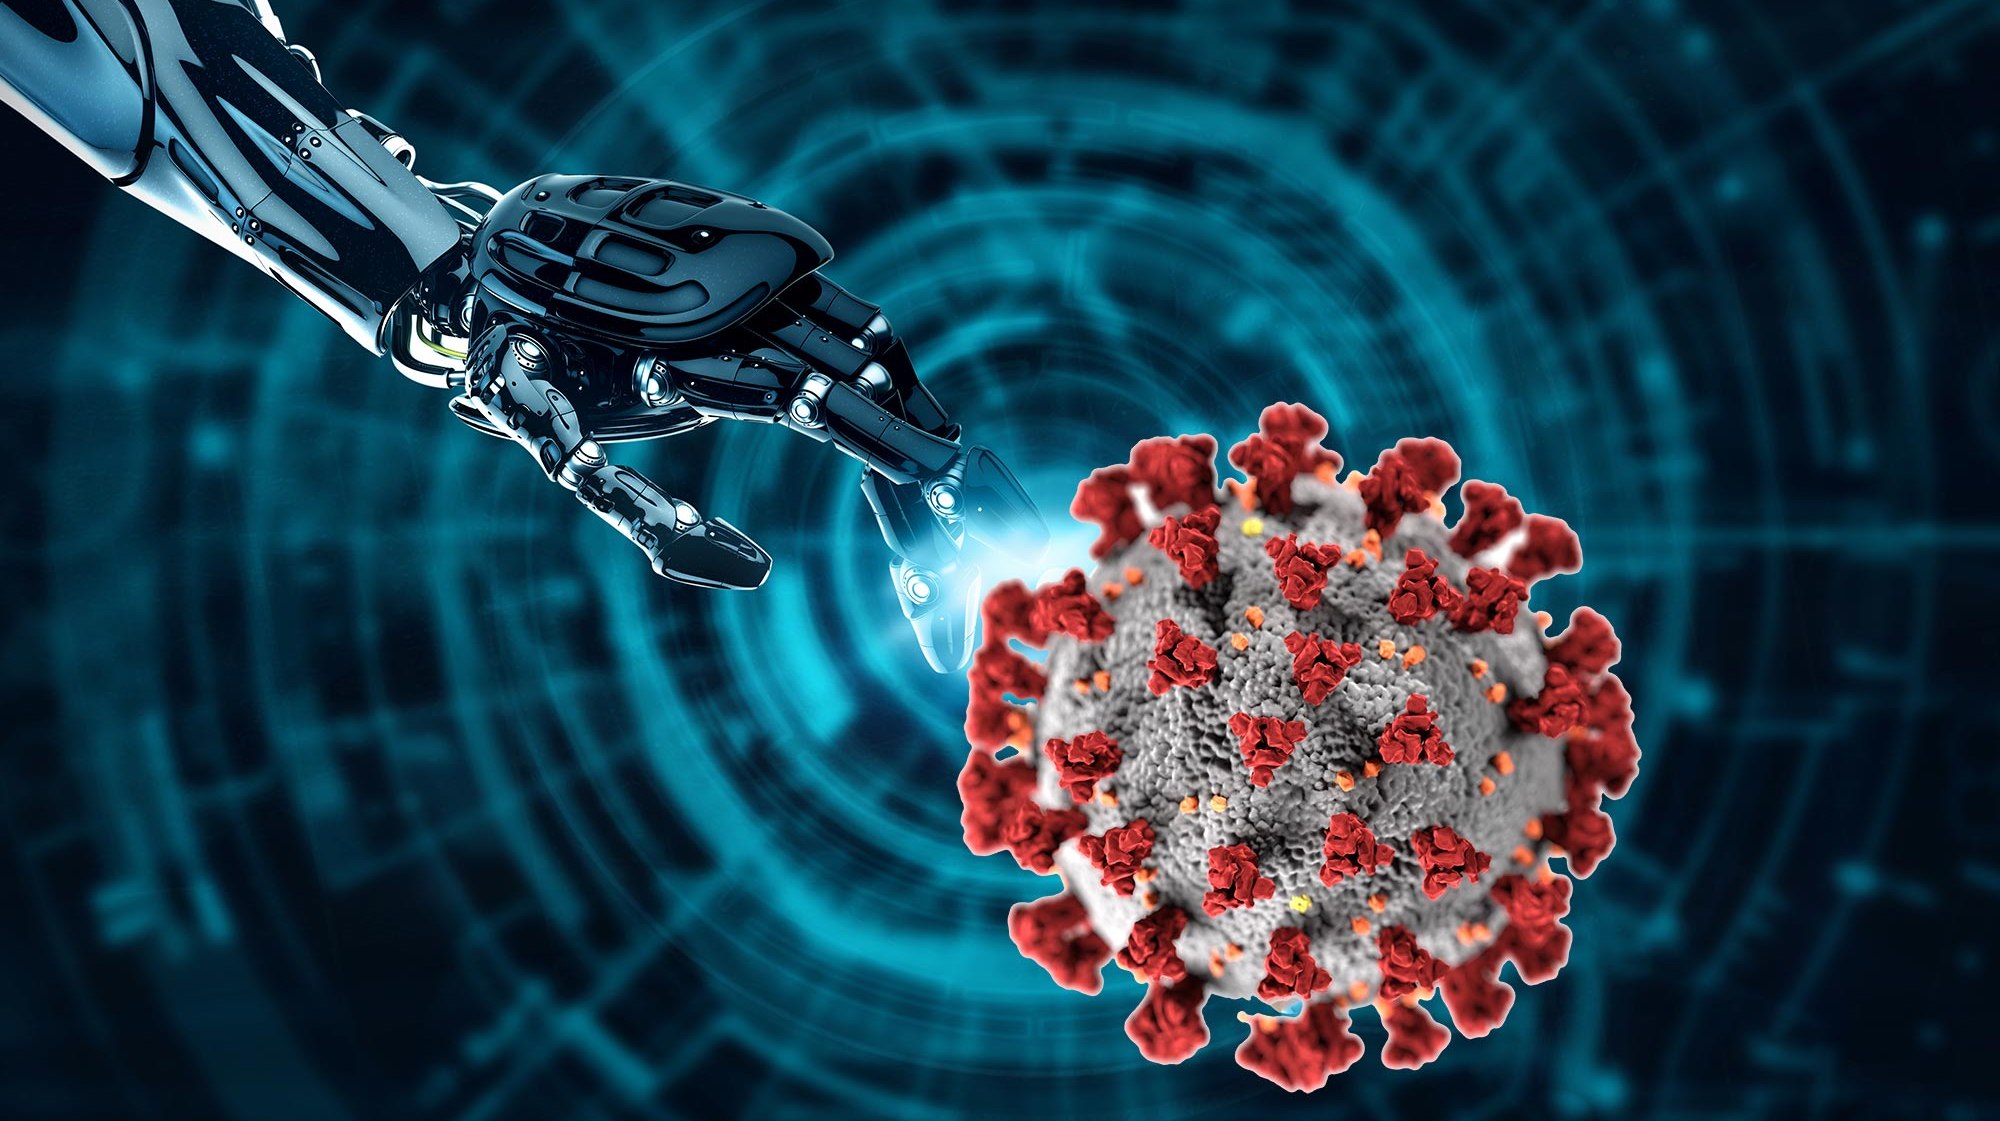 Oxford AI Tool Could Help Us Stay One Step Ahead of the Next Virus Variant